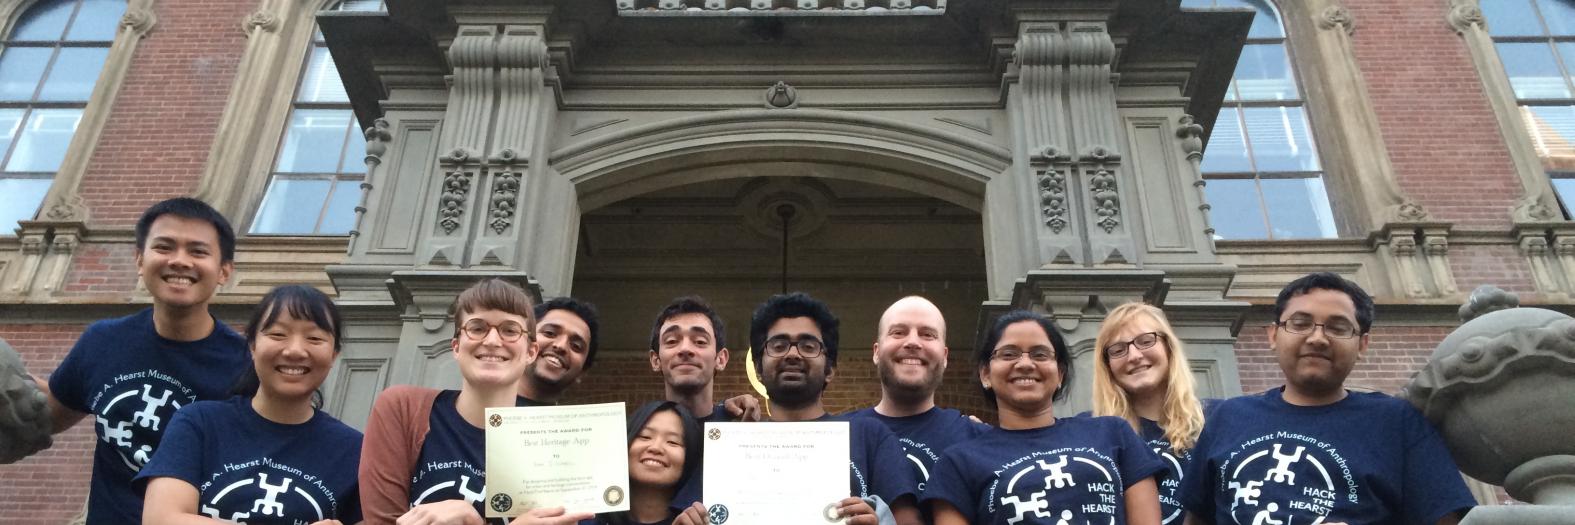 The I School team won the HackTheHearst Hackathon Grand Prize.